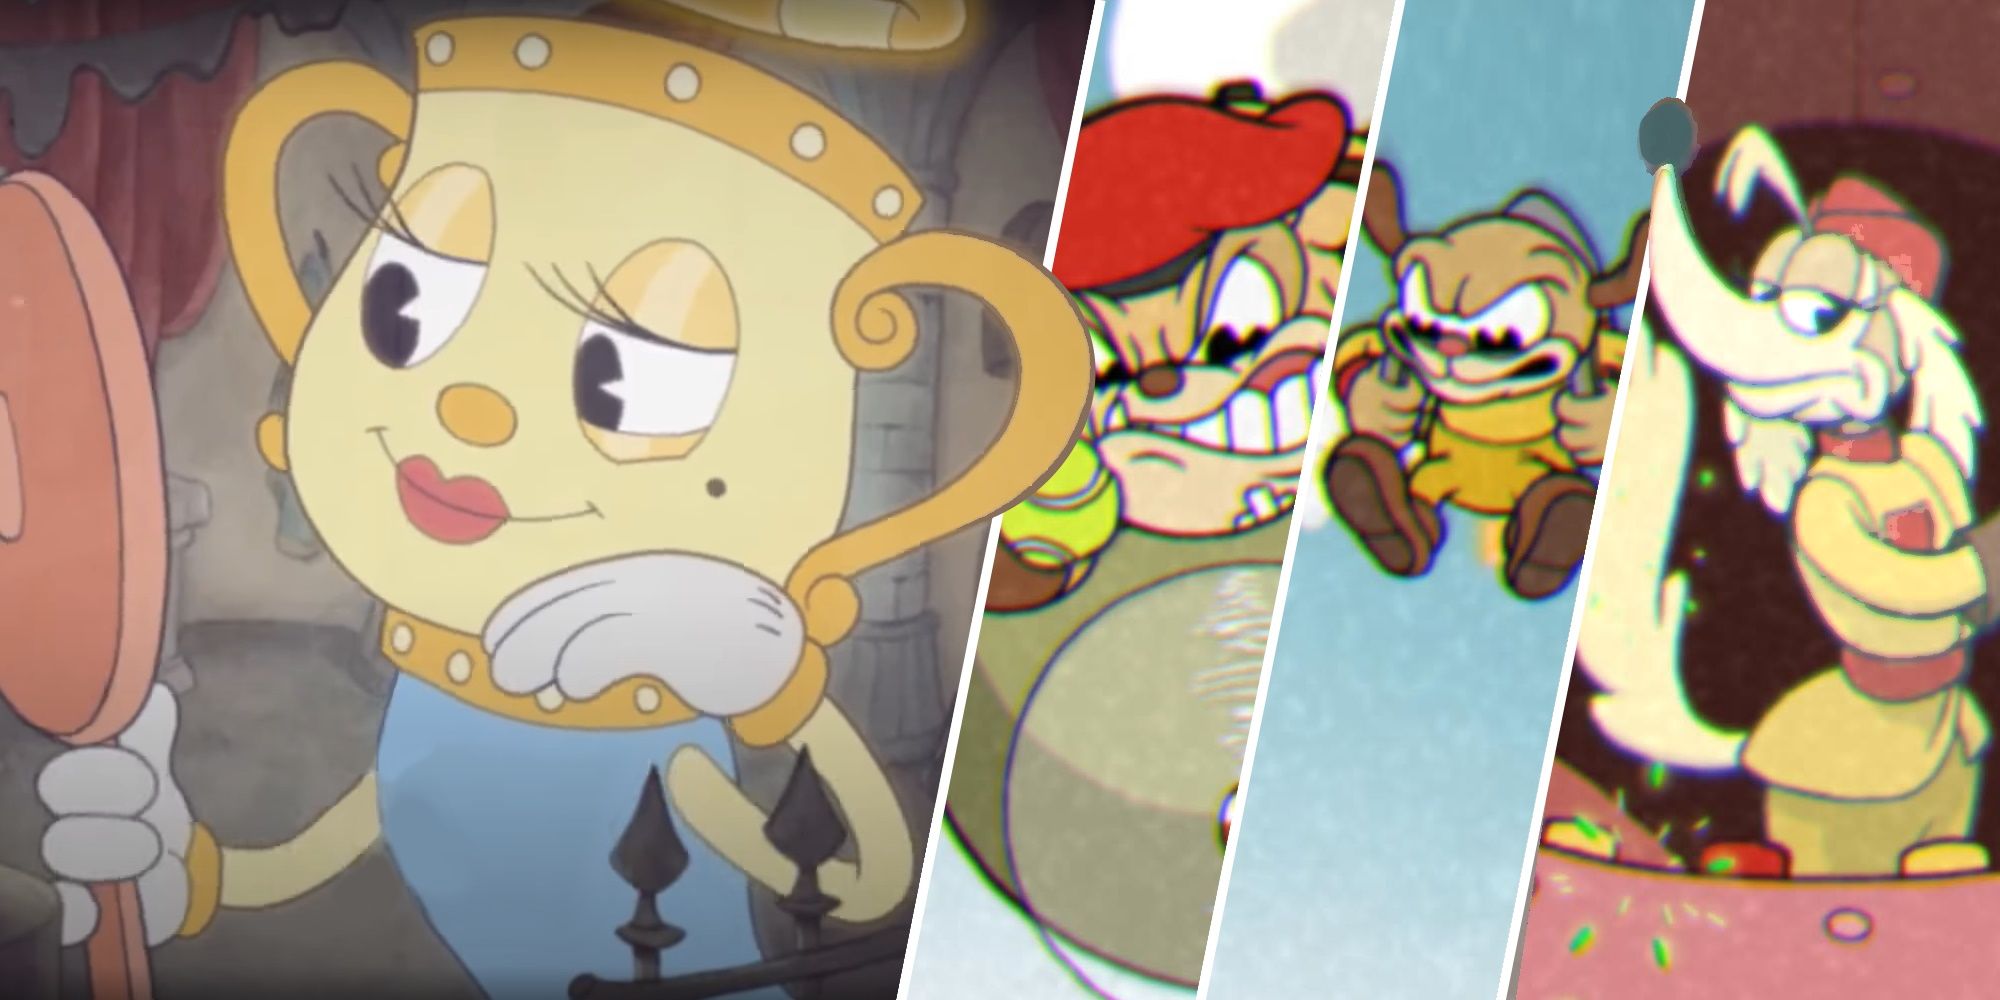 Cuphead The Delicious Course, The Howling Aces, Featured Image Revised